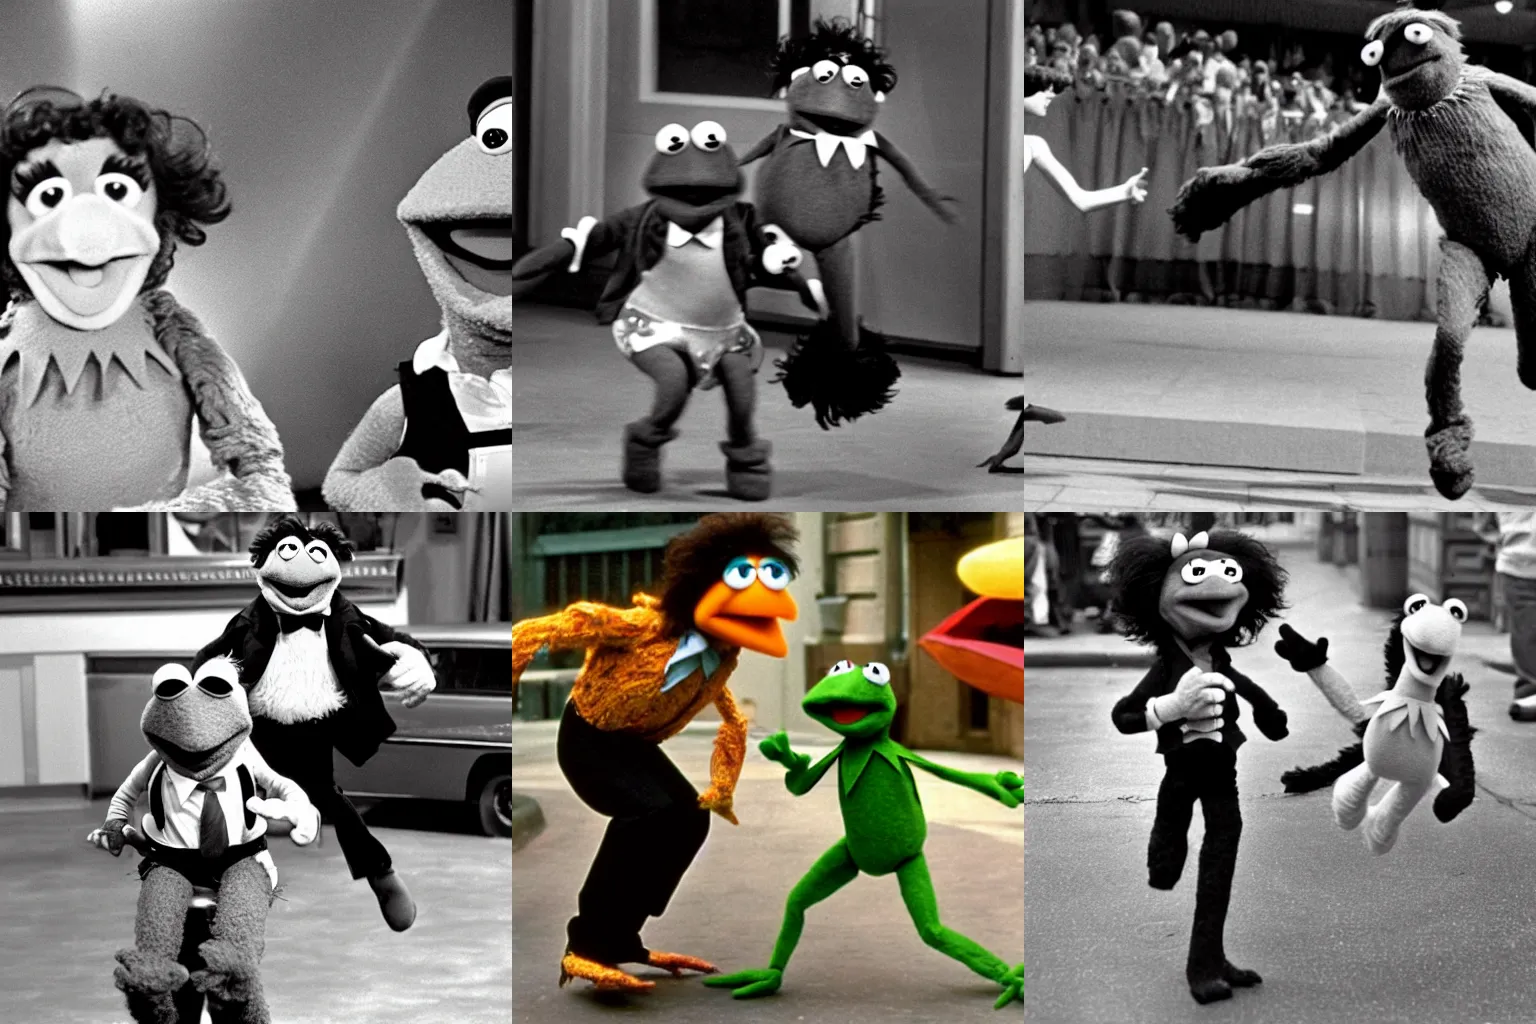 Prompt: Sylvester Stallone Muppet being chased by Kermit the Frog, 1955